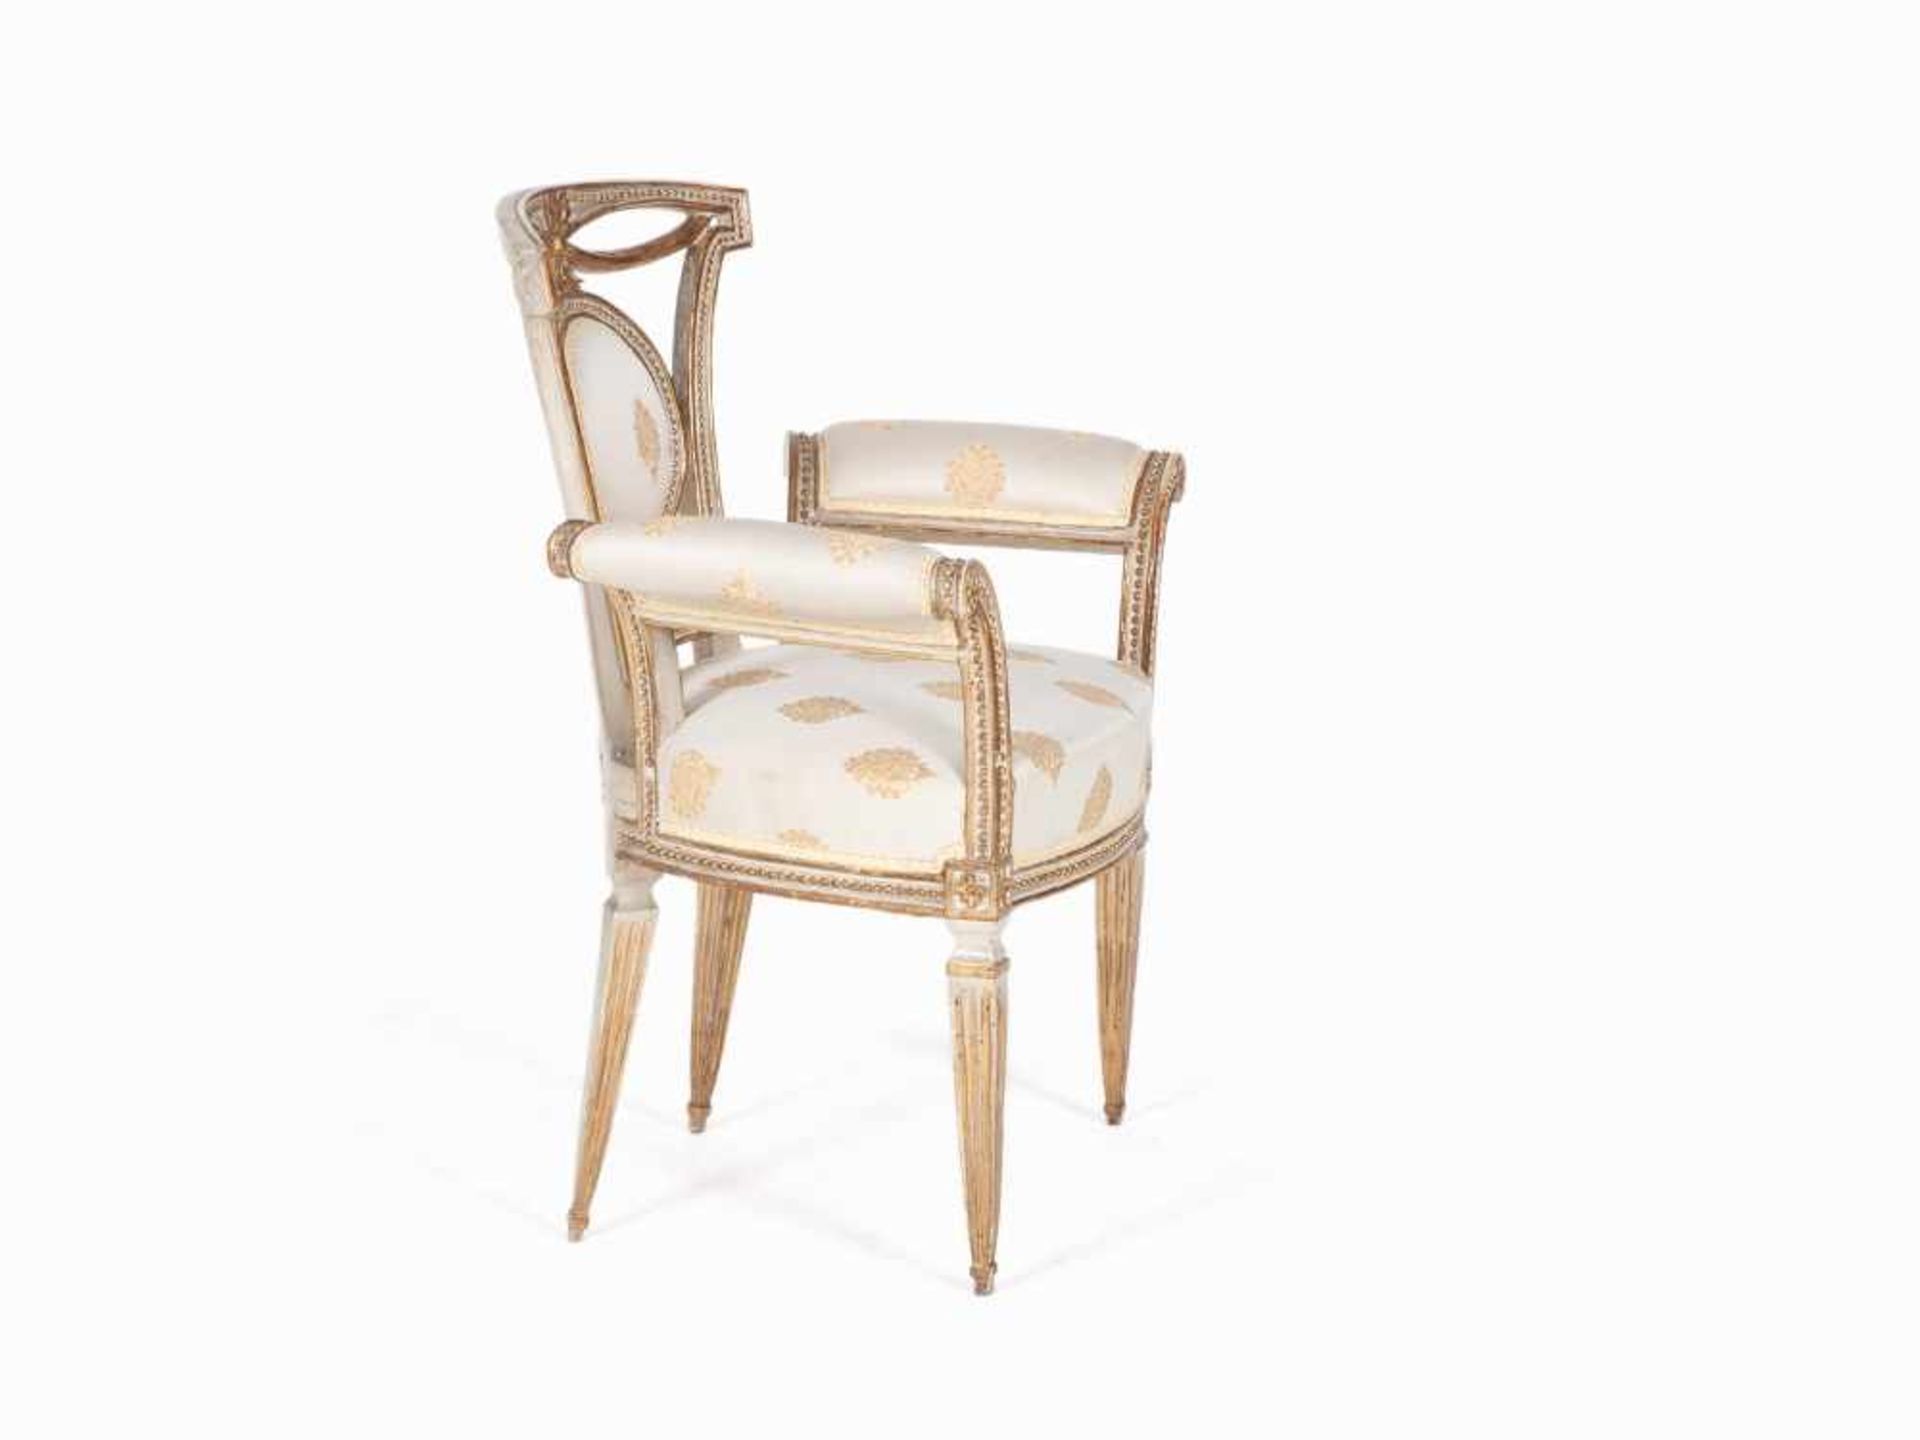 Pair of Armchairs, Lucca, around 1790 Solid wood, carved, white painted and partial gold-plated, - Image 9 of 10